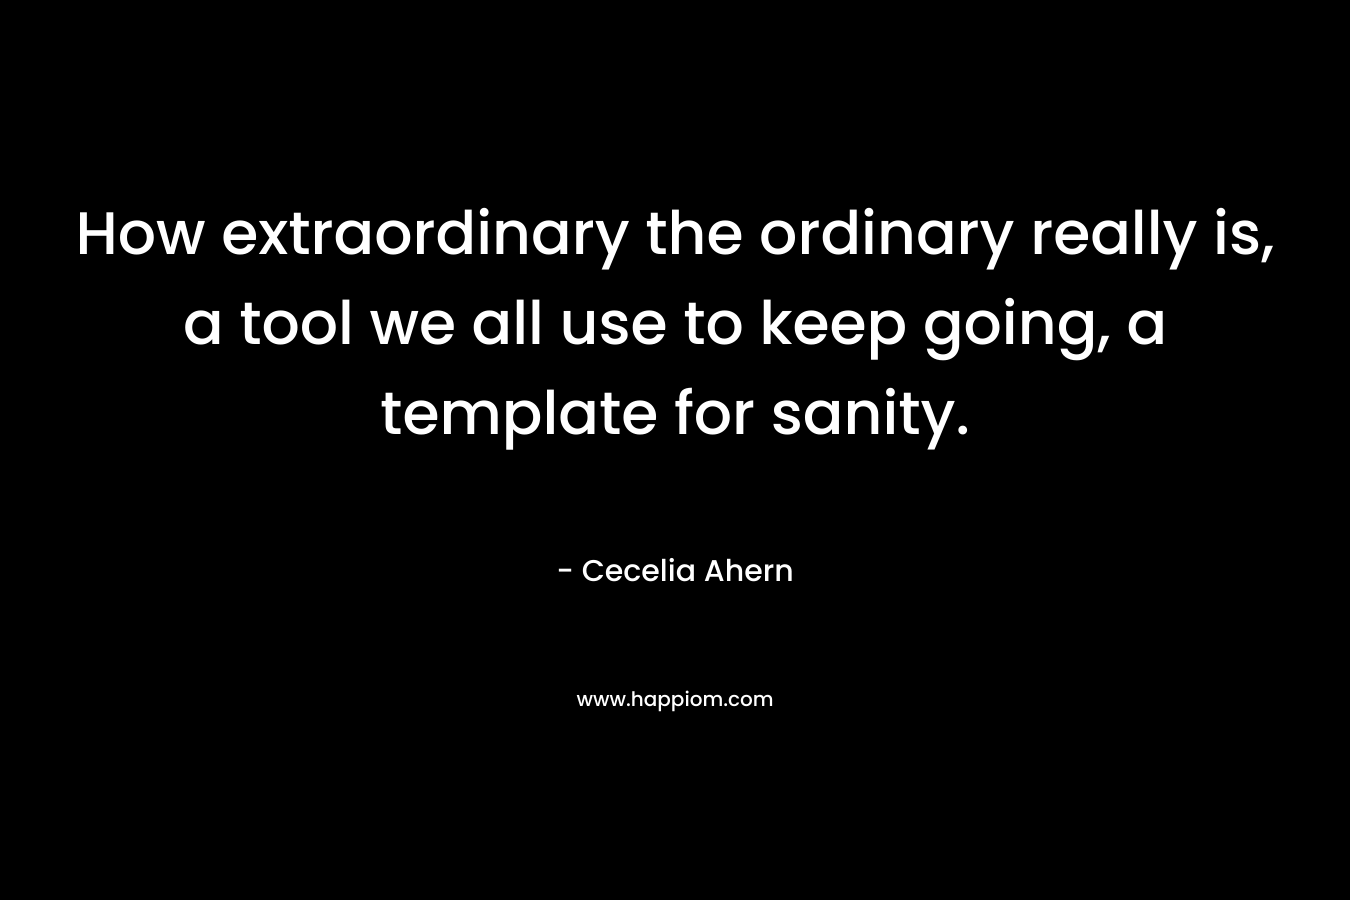 How extraordinary the ordinary really is, a tool we all use to keep going, a template for sanity.